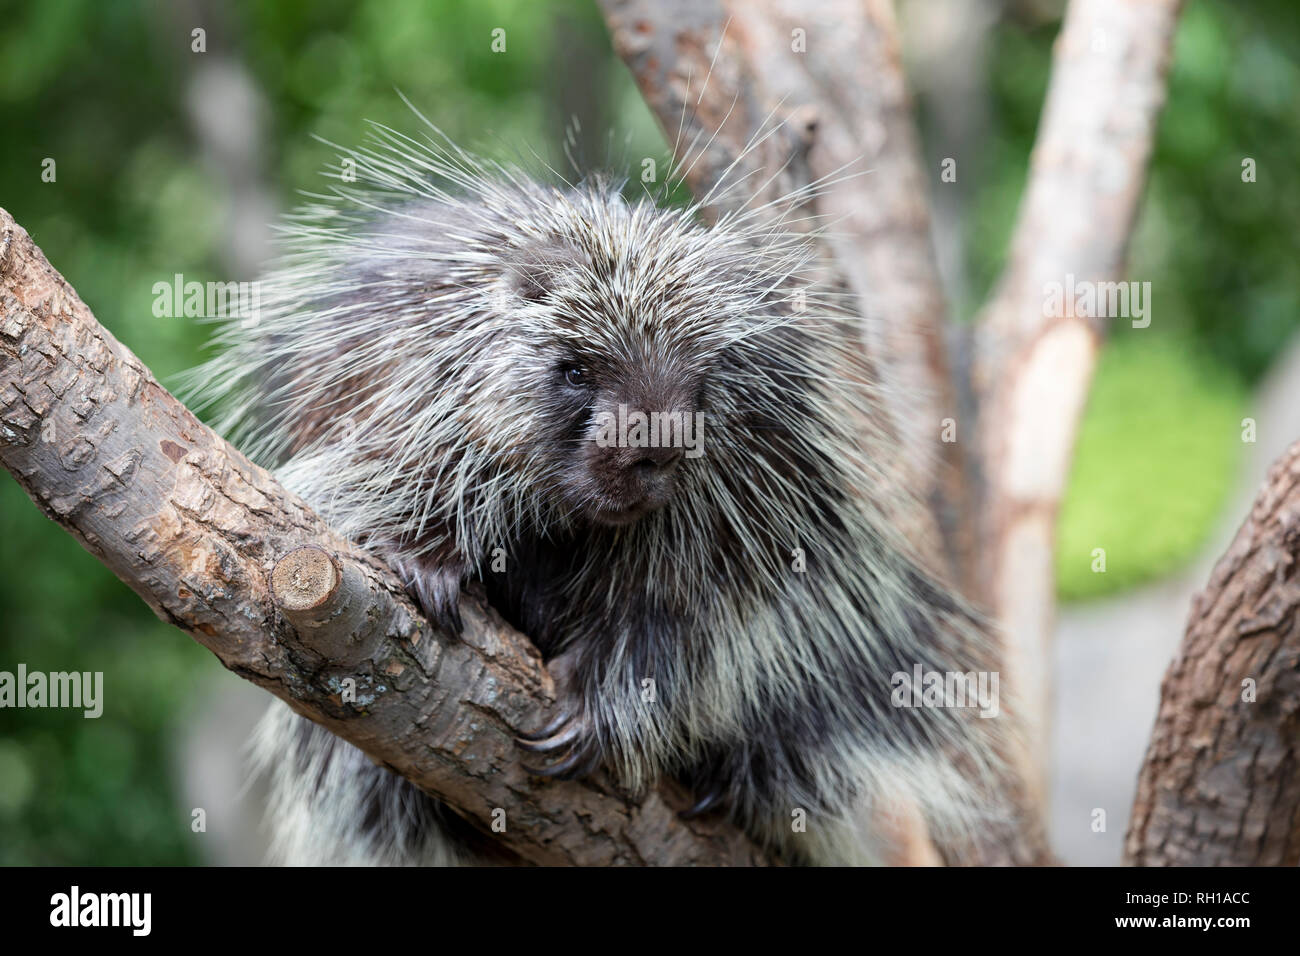 North American Porcupine (Erethizon Dorsatum) climbing a tree, also known as the Canadian Porcupine or common porcupine Stock Photo